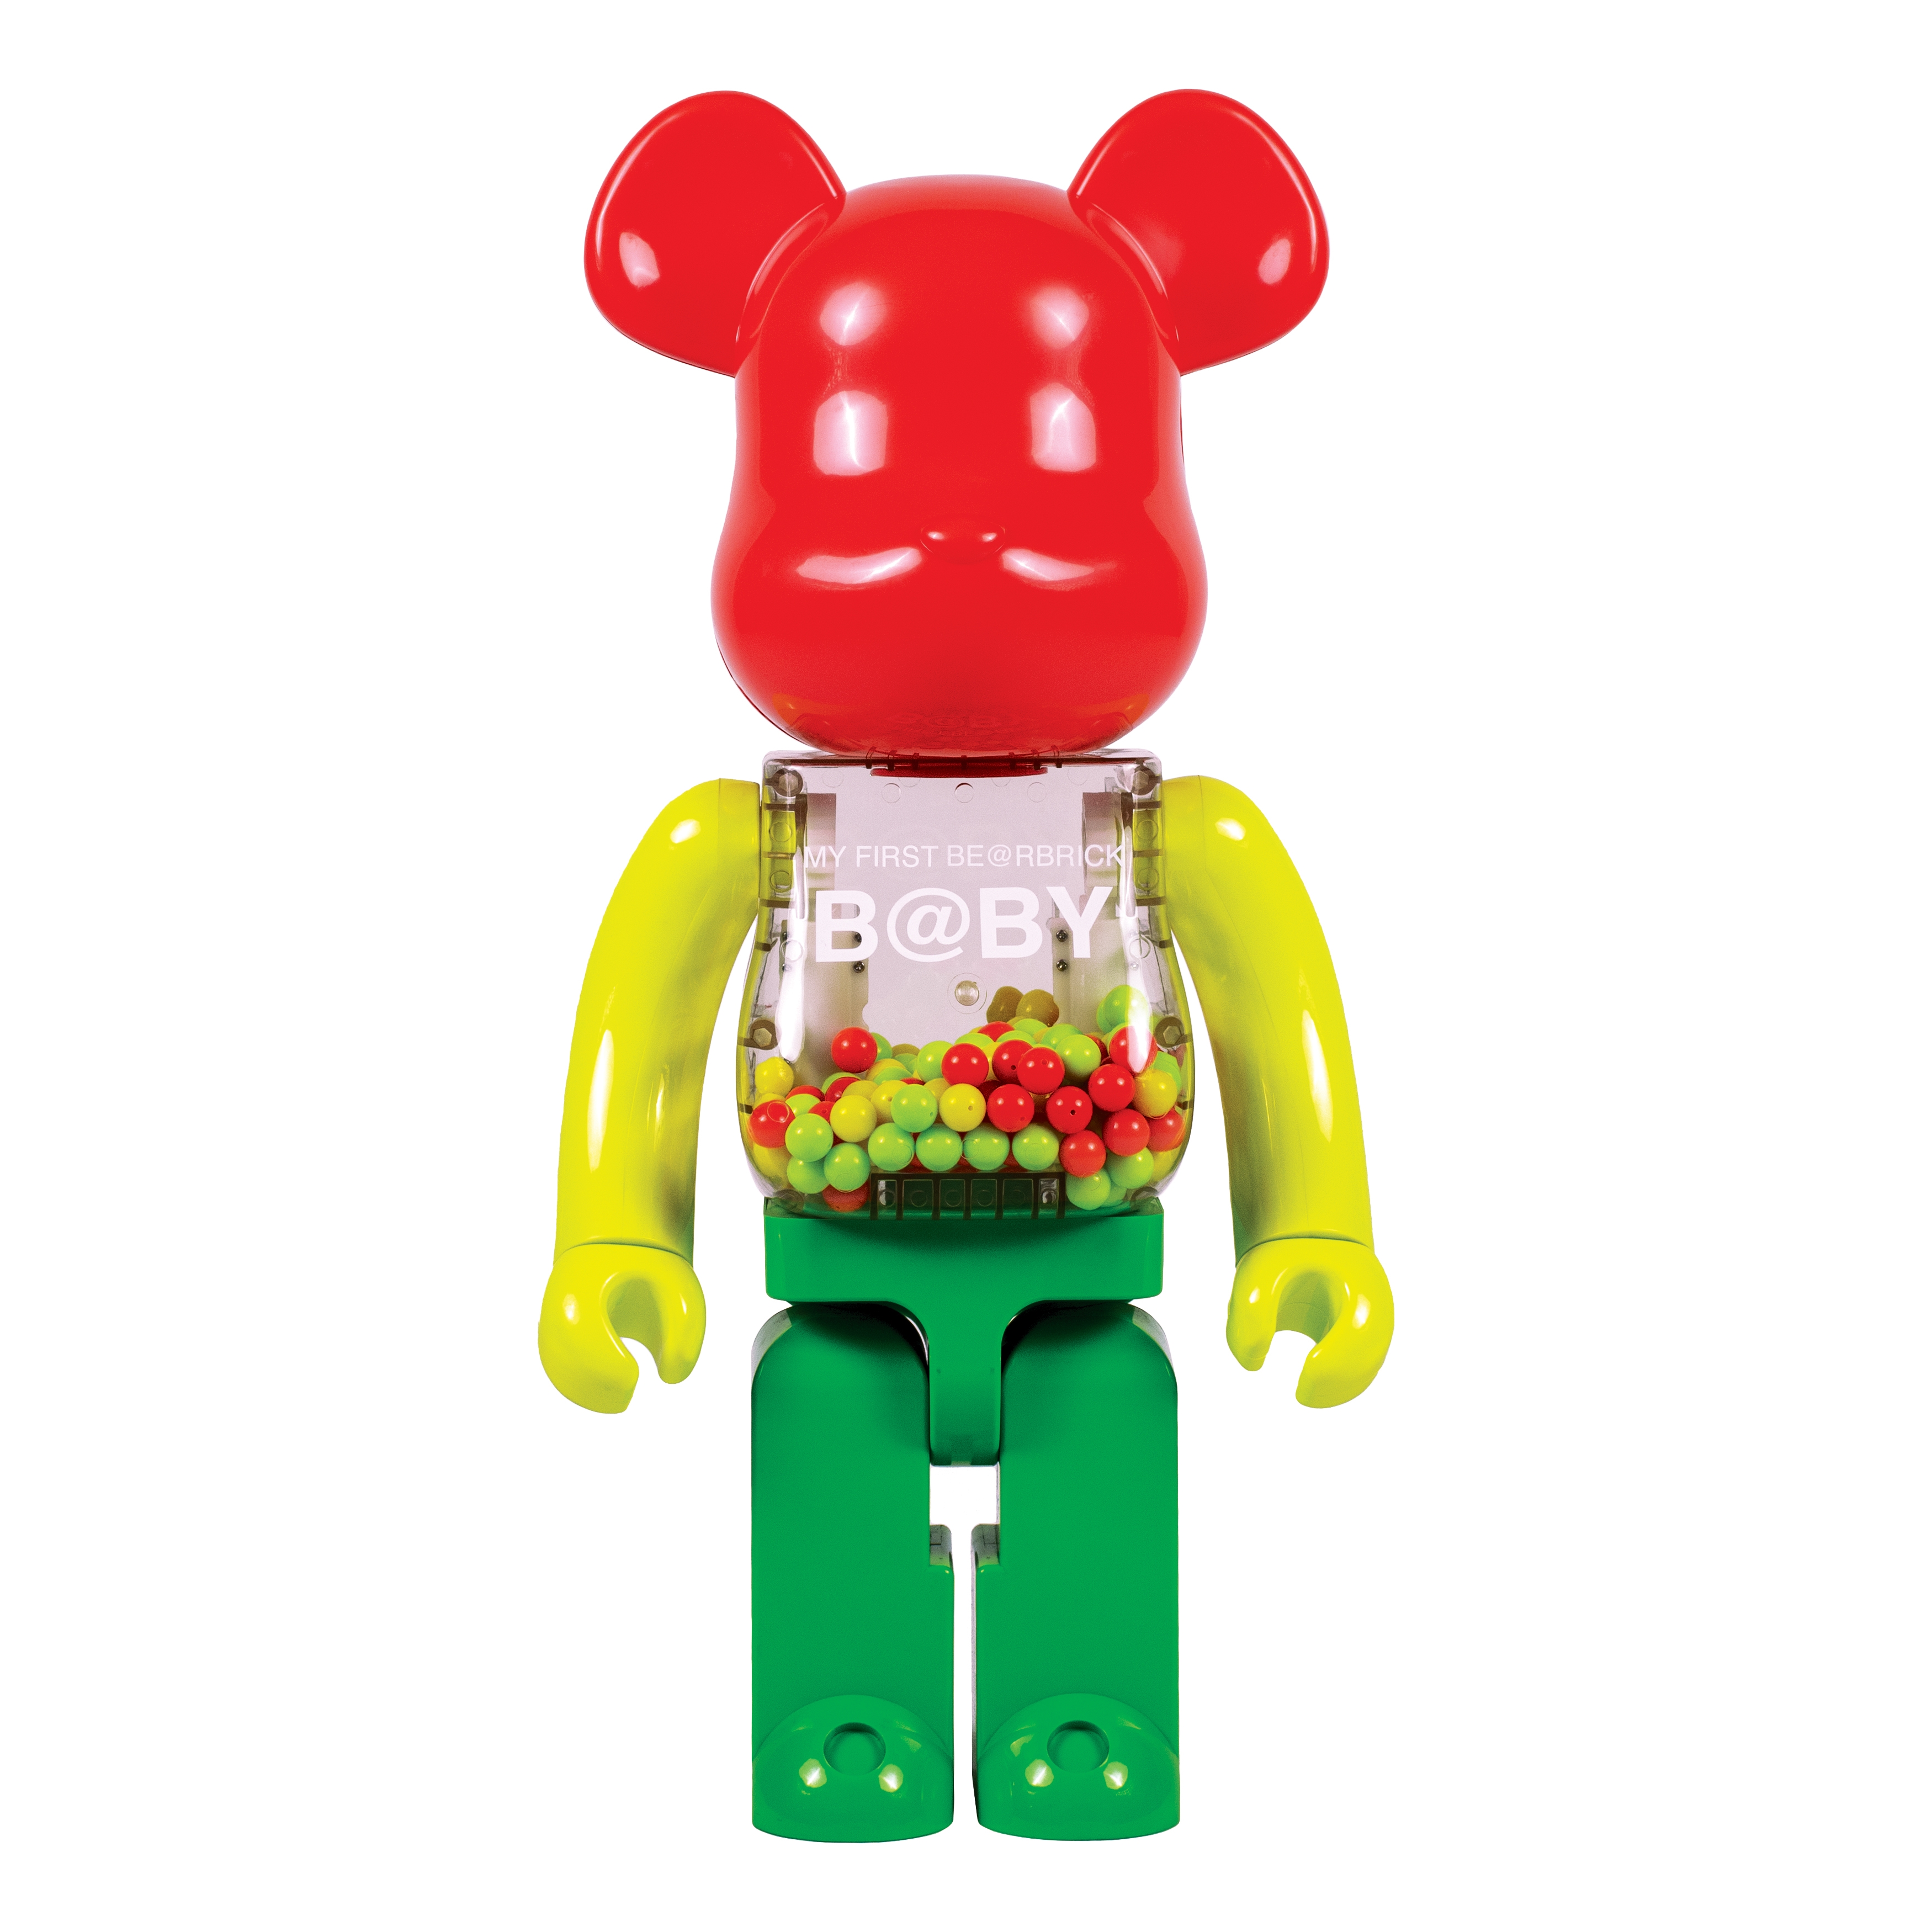 Medicom Toy | The Bearbrick dressed by Karl Lagerfeld for Chanel